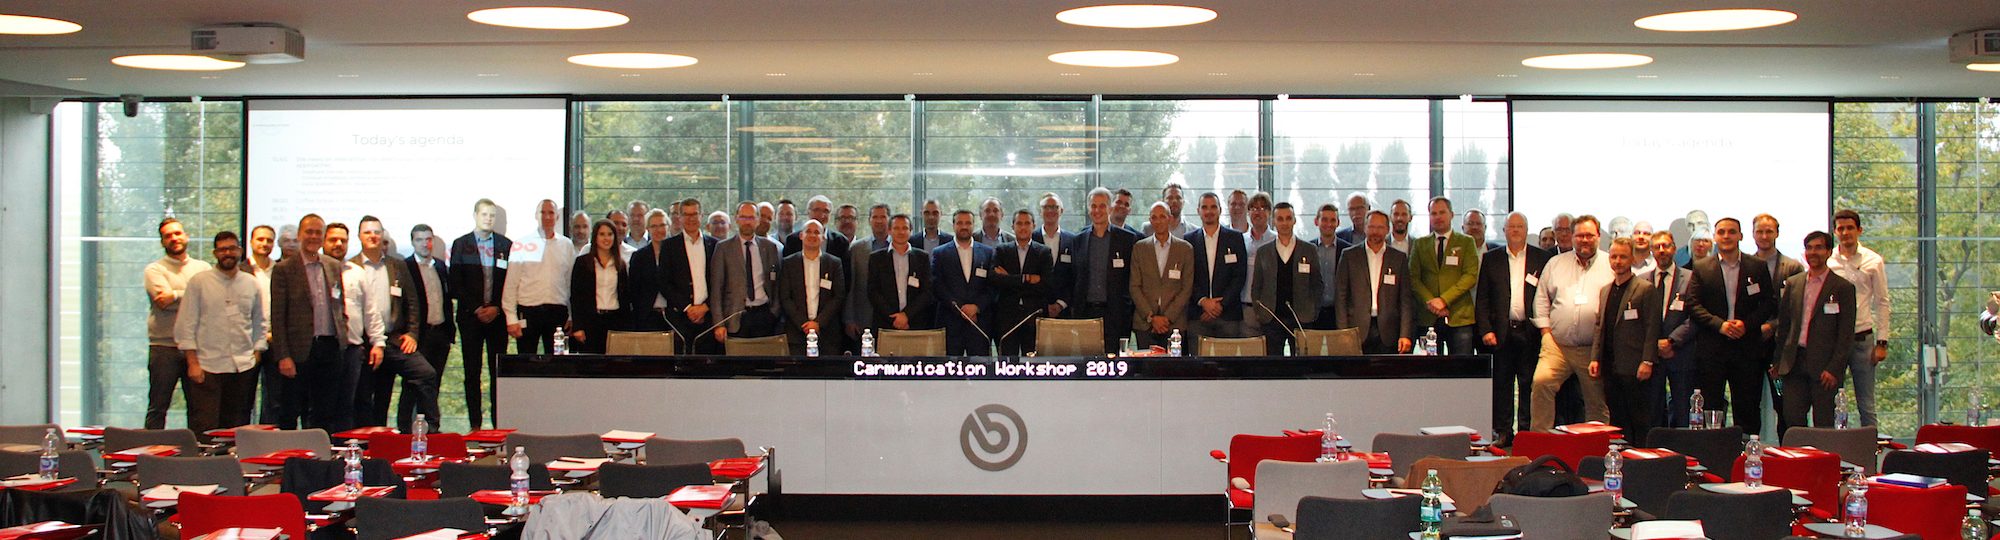 Image of attendees of Carmunication General Assembly 2019